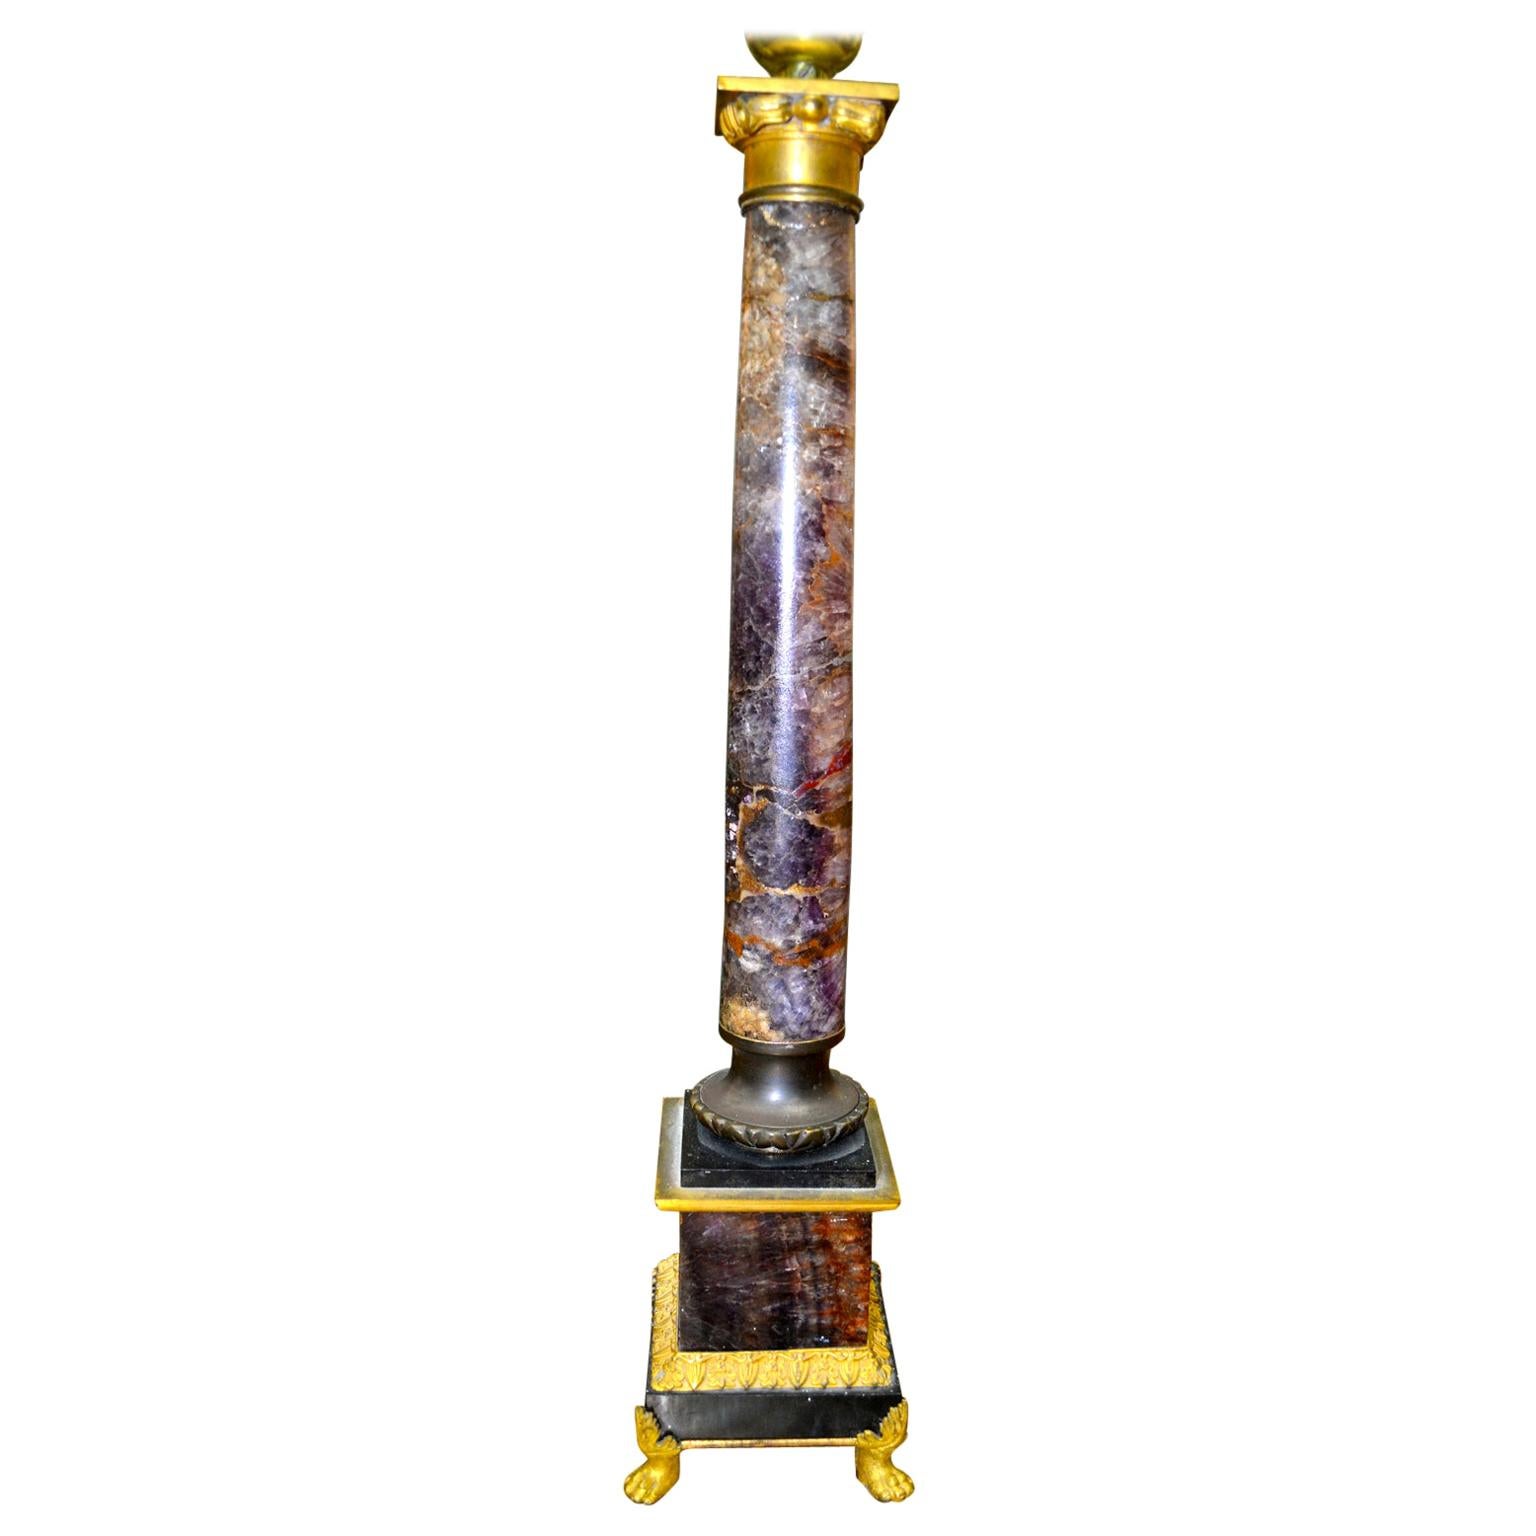 A very rare early 19th century English Regency Blue John stone, column lamp, having a gilt capital with a cut amethyst crystal finial. The column rests on a square blue john, and black marble base with a gilt bronze band and four gilt bronze paw